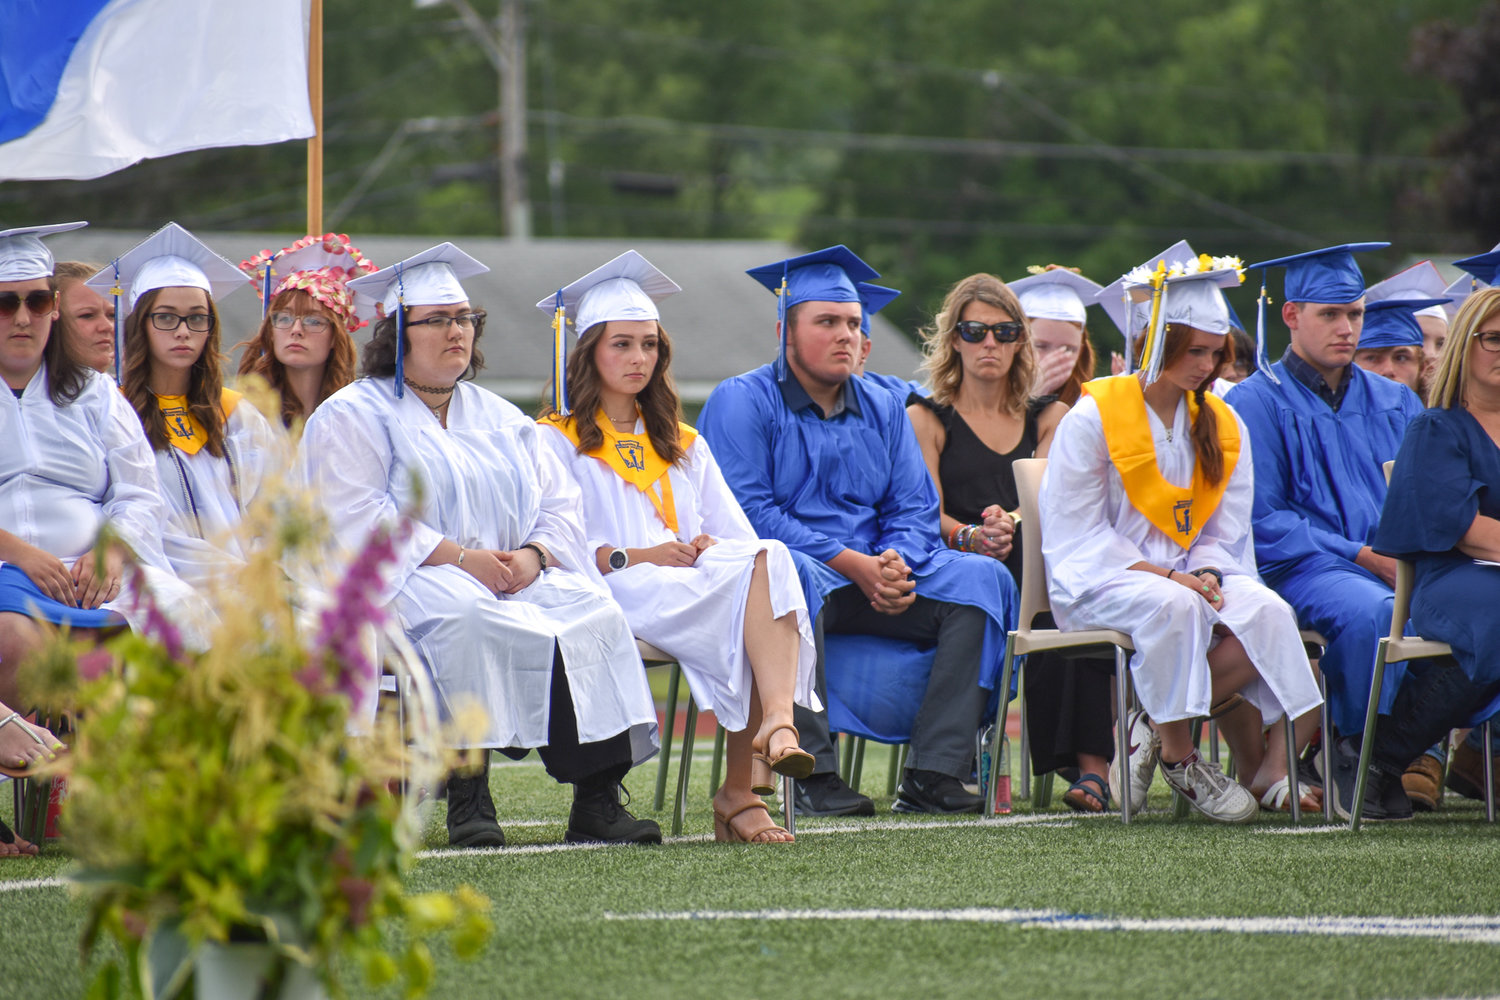 The Camden Class of 2022 included 163 graduates.